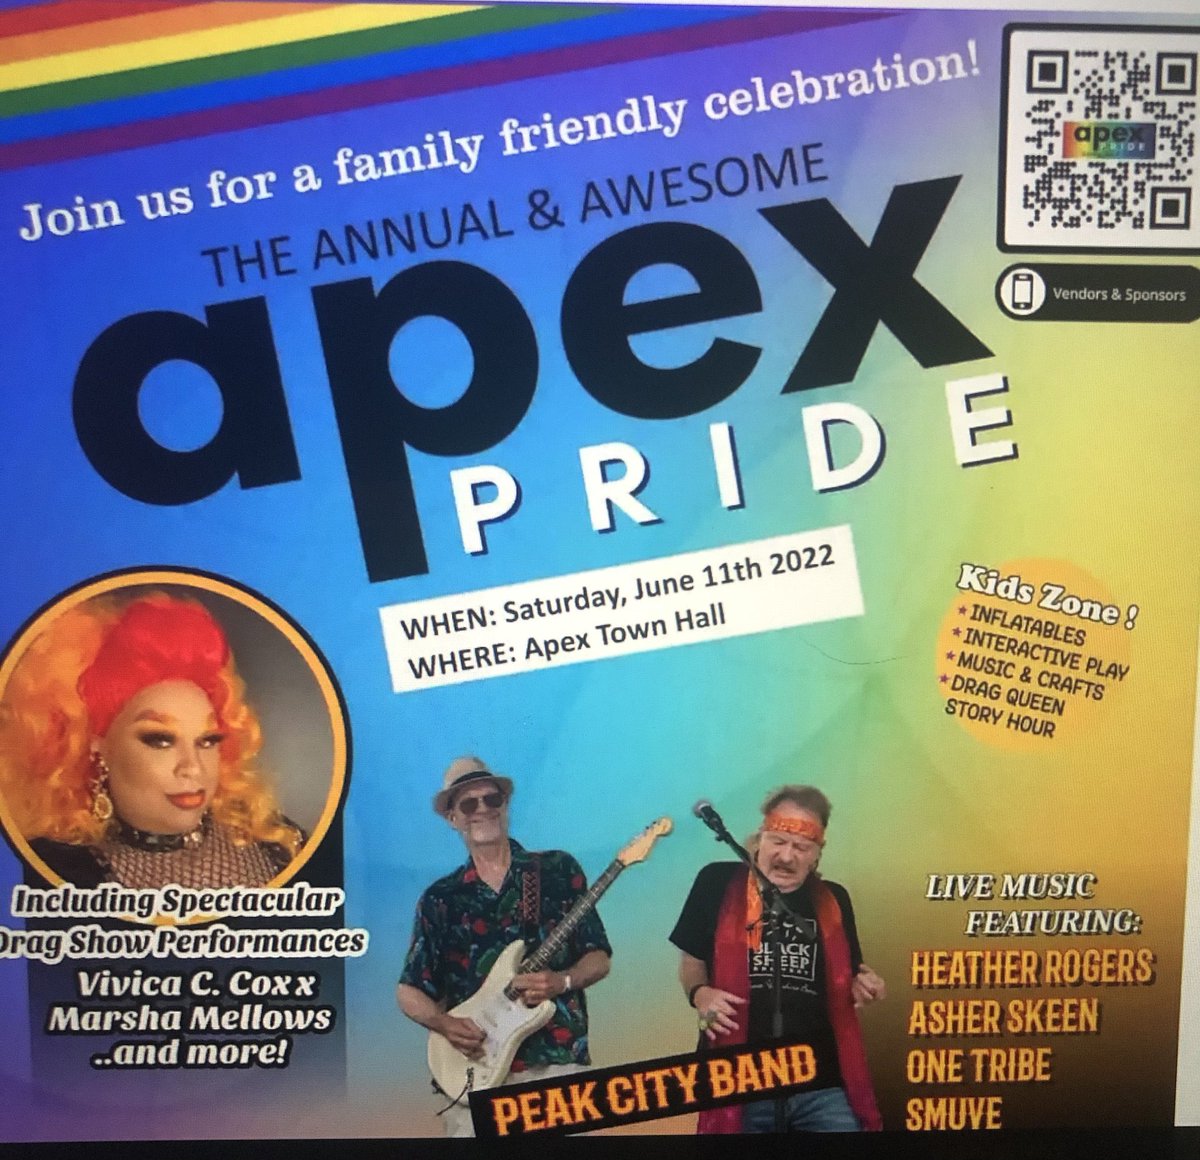 Various drag events for kids are being advertised everywhere:Mahwah, NJ - drag queen story timeApex, NC - DQSH & drag showManchester, VT - drag queen bingoDenver, CO - drag queen talent show